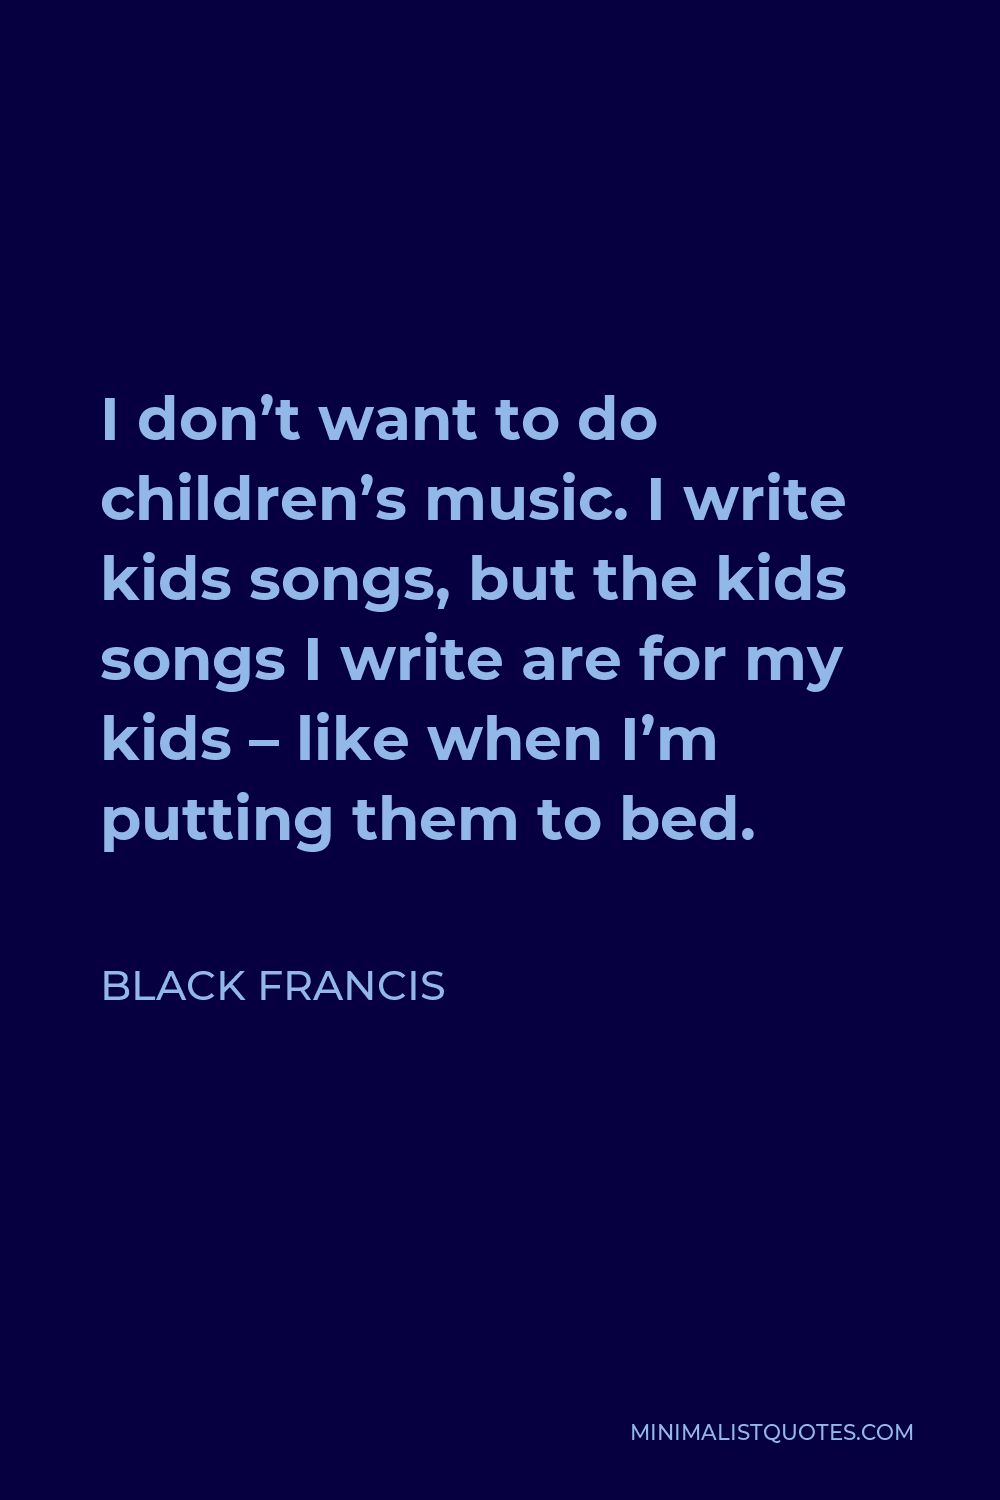 Black Francis Quote - I don’t want to do children’s music. I write kids songs, but the kids songs I write are for my kids – like when I’m putting them to bed.